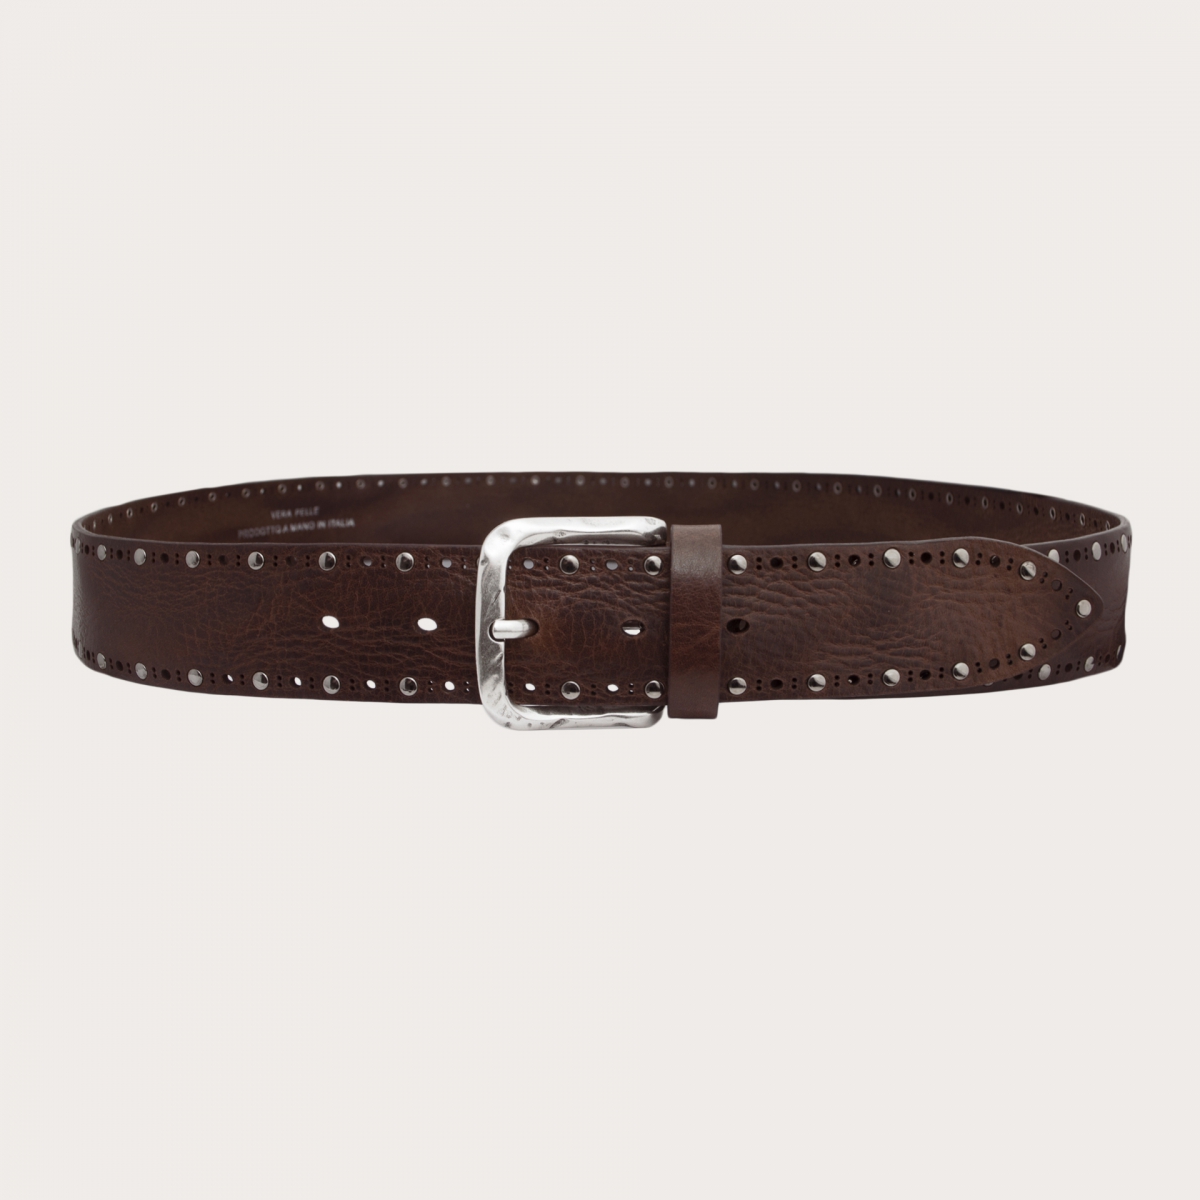 BRUCLE Raw cut leather belt with studs, brown